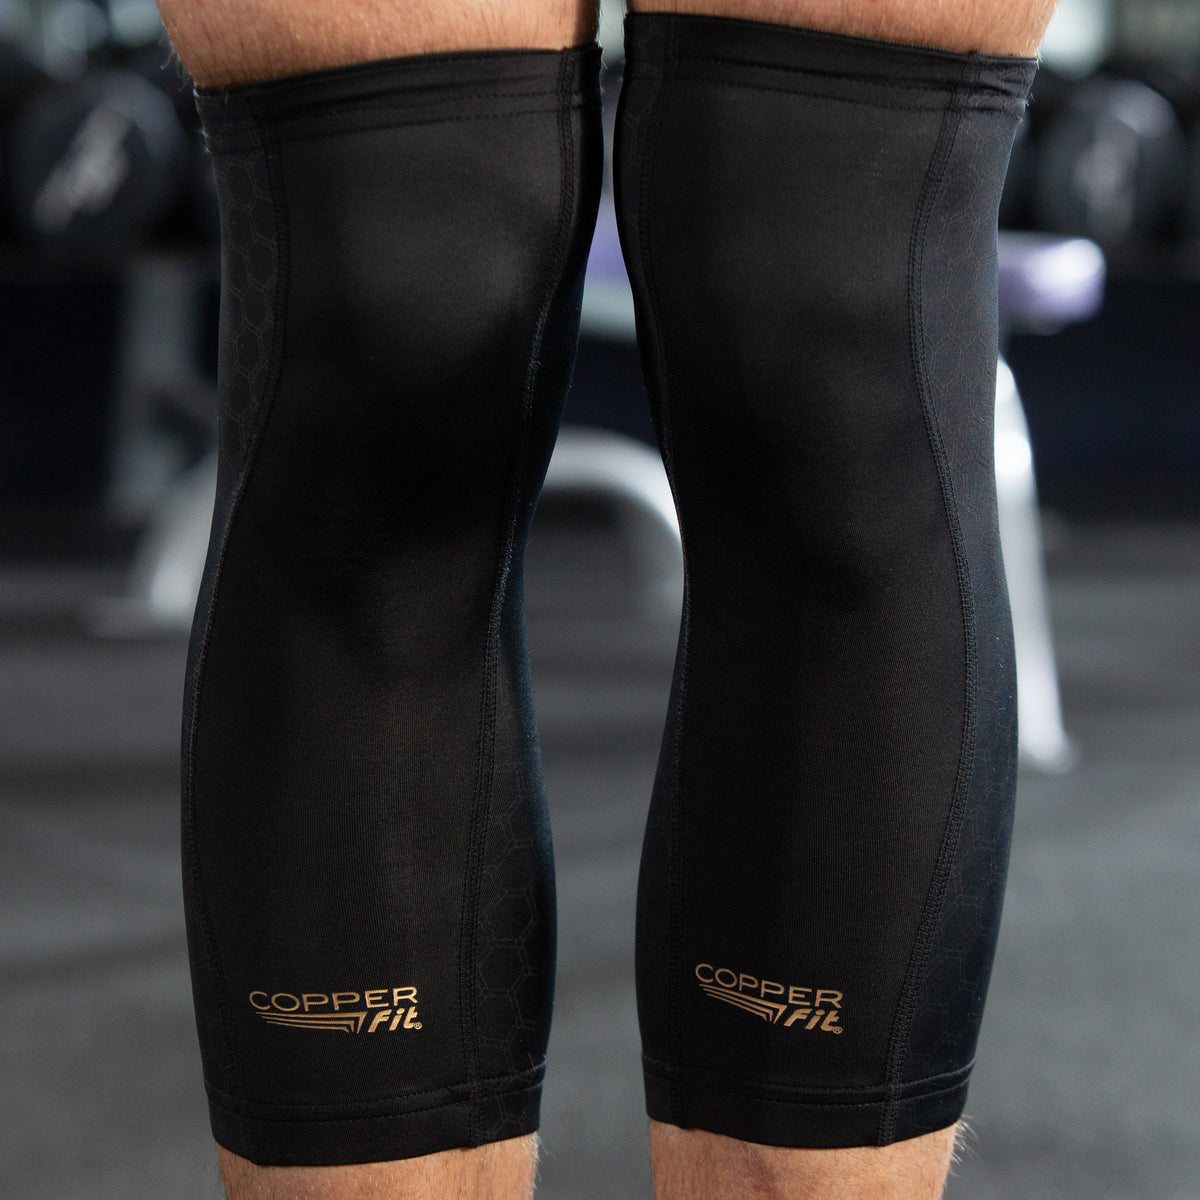 Freedom Knee Sleeves for Everyday Compression - Copper Fit